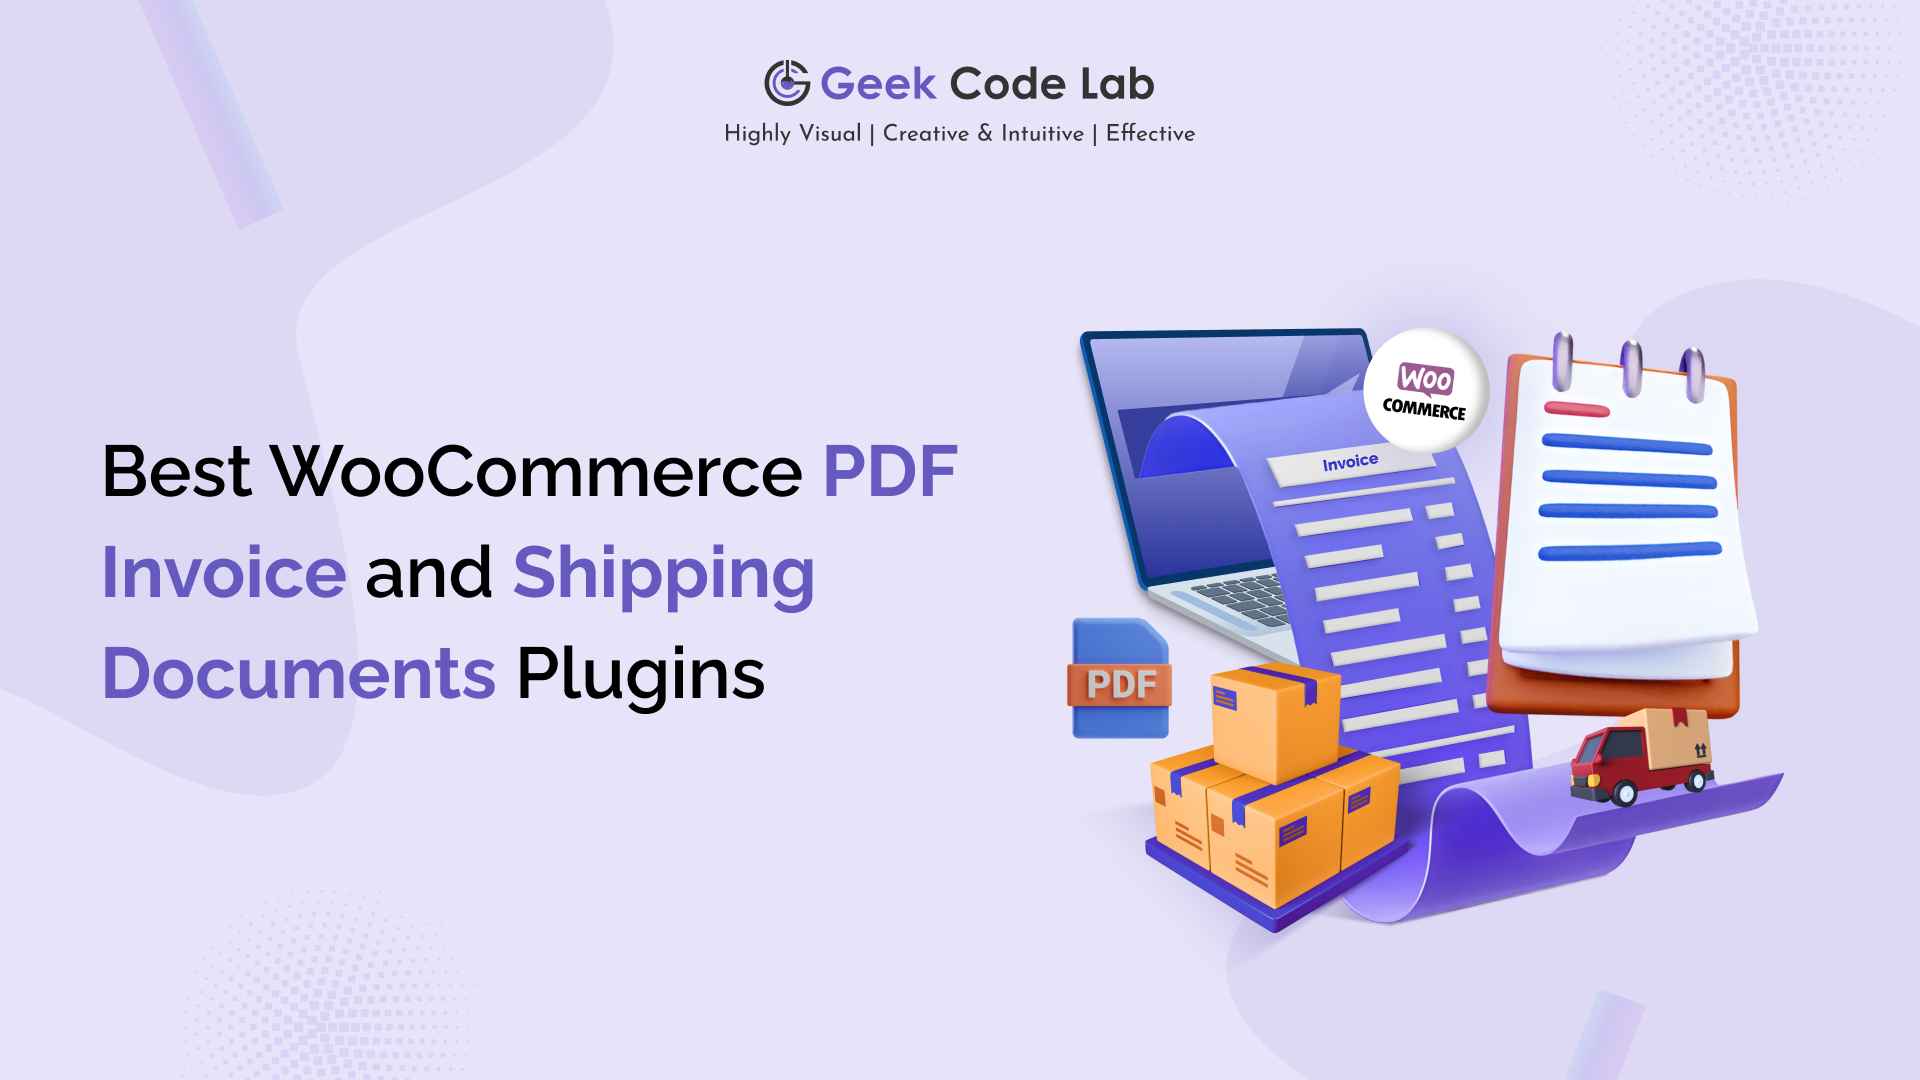 Best WooCommerce PDF Invoice and Shipping Documents Plugins